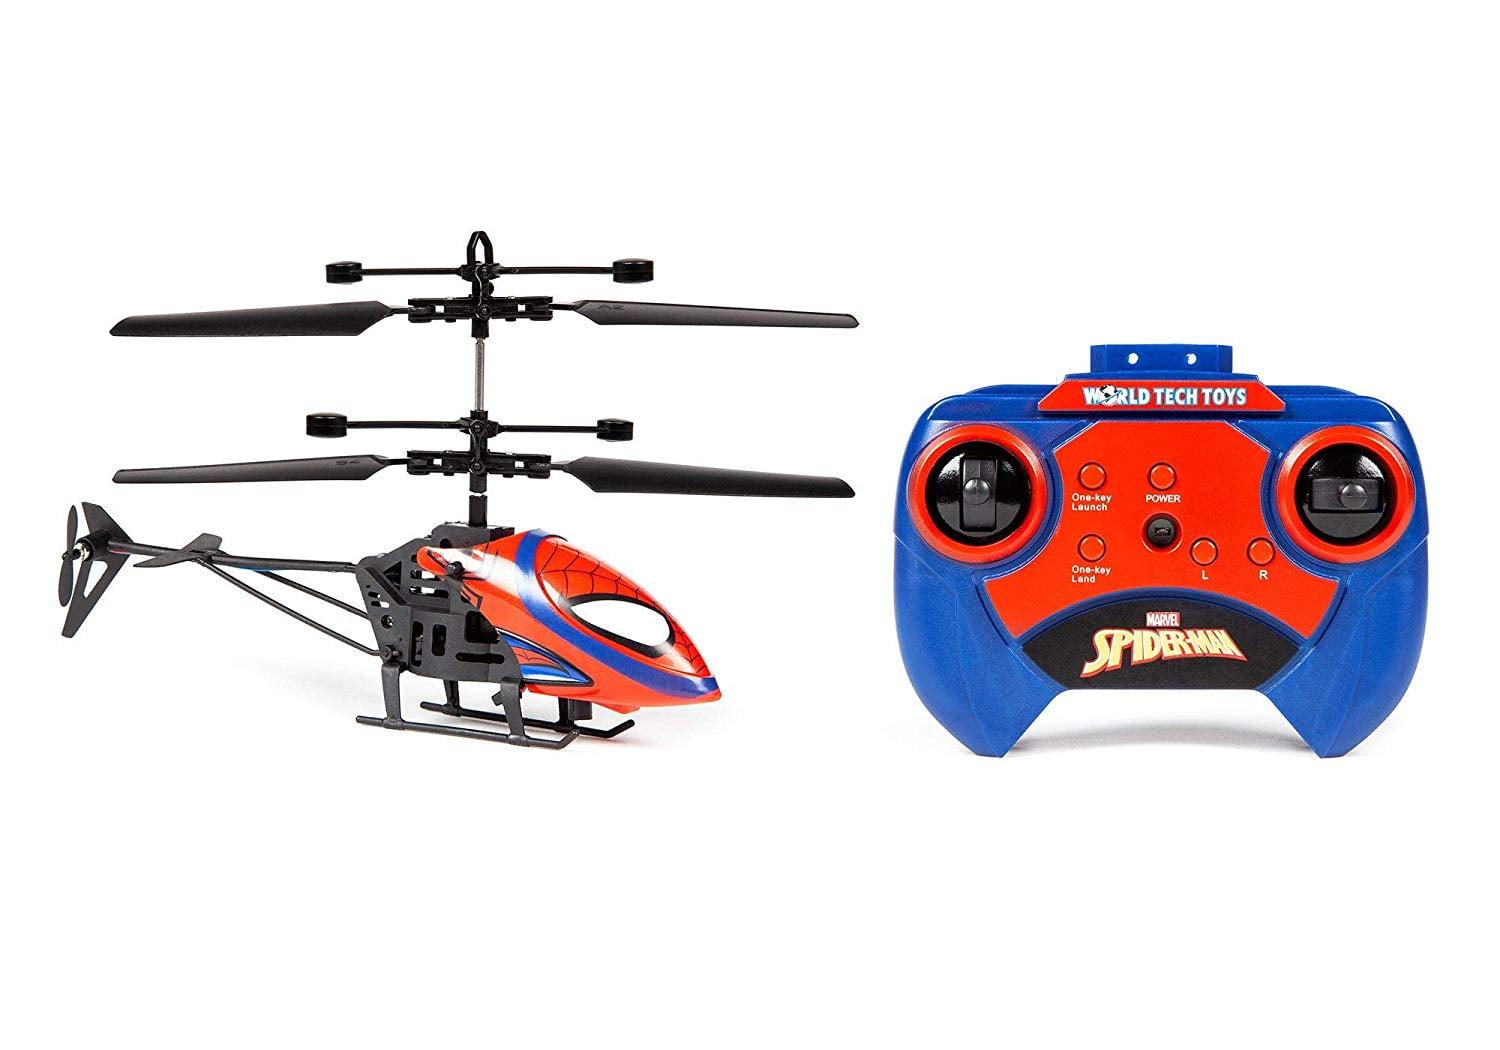 Remote Control Helicopter Spider Man: Retail Price and Promotions for Spider Man RC Helicopter Toy